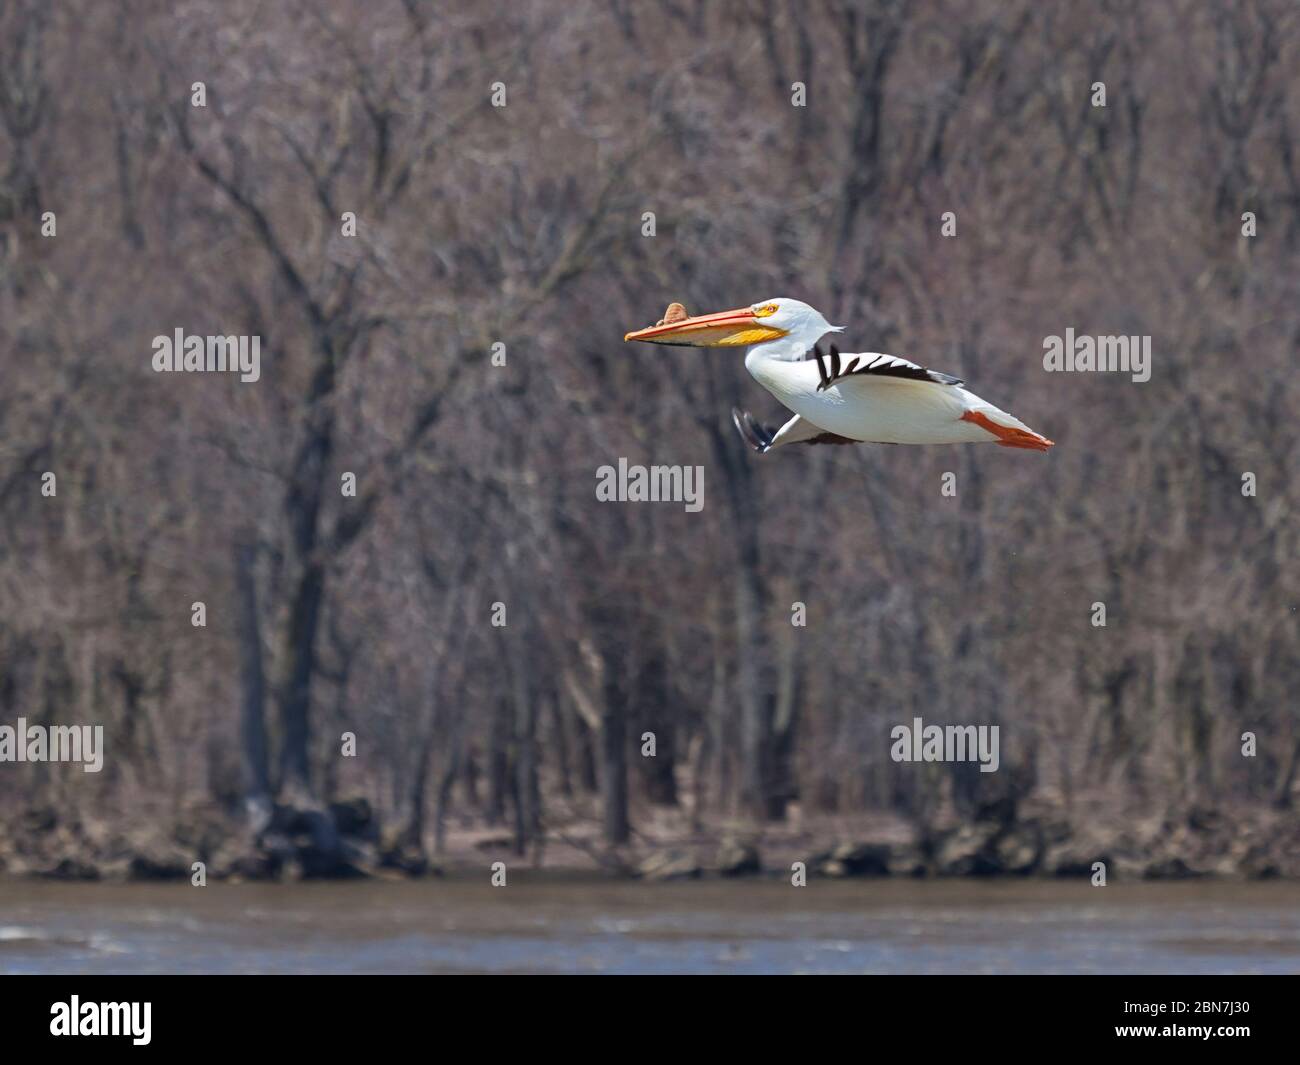 With its striking white feathers, a single American white pelican floats above the muddy waters of the MIssissippi River. Stock Photo